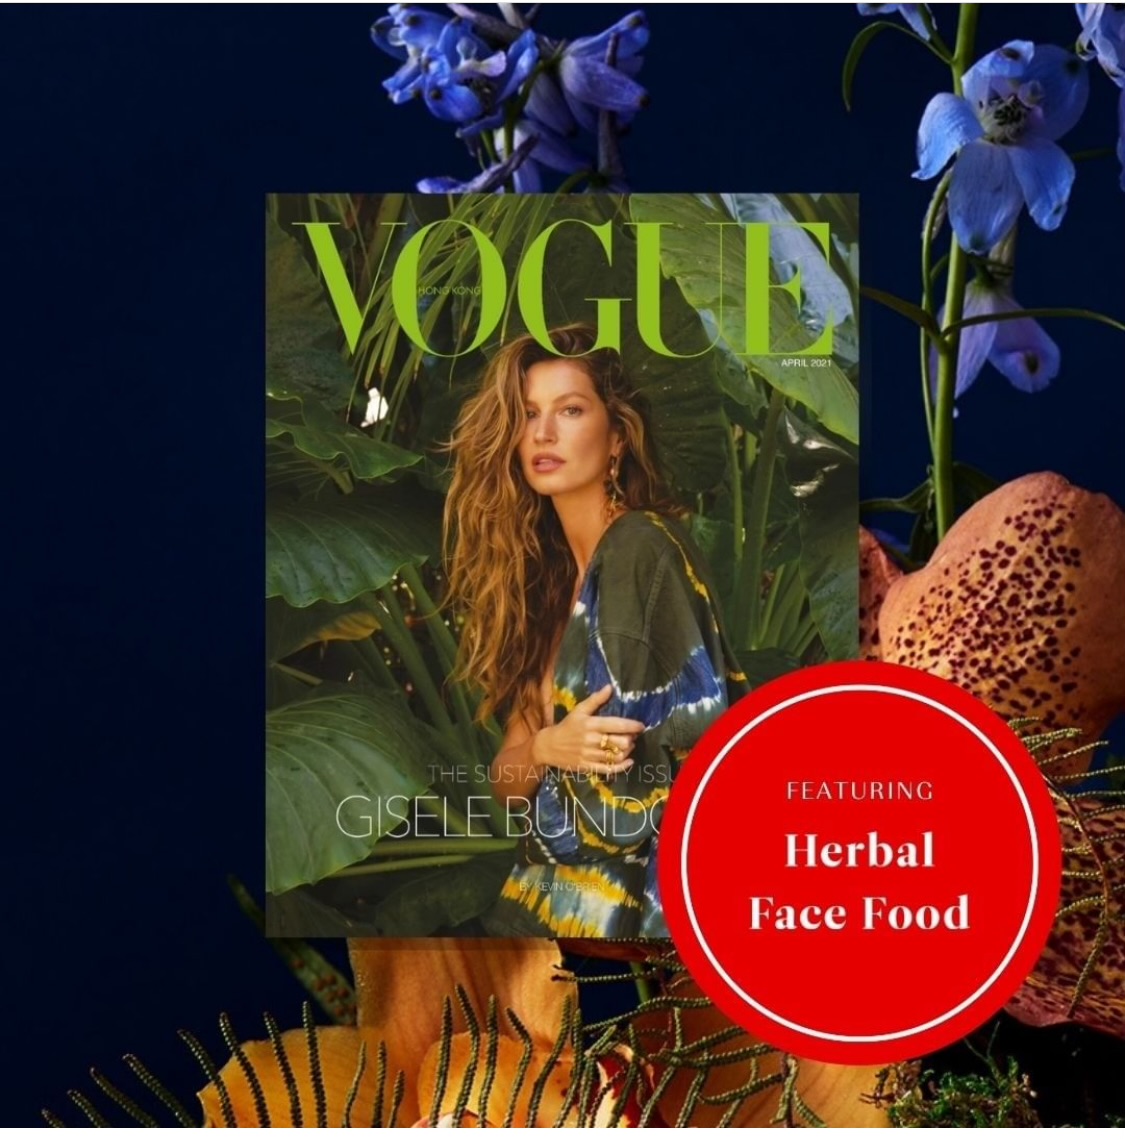 Super model, Gisele Bundchen, on the cover of Vogue Magazine with Herbal face Food 